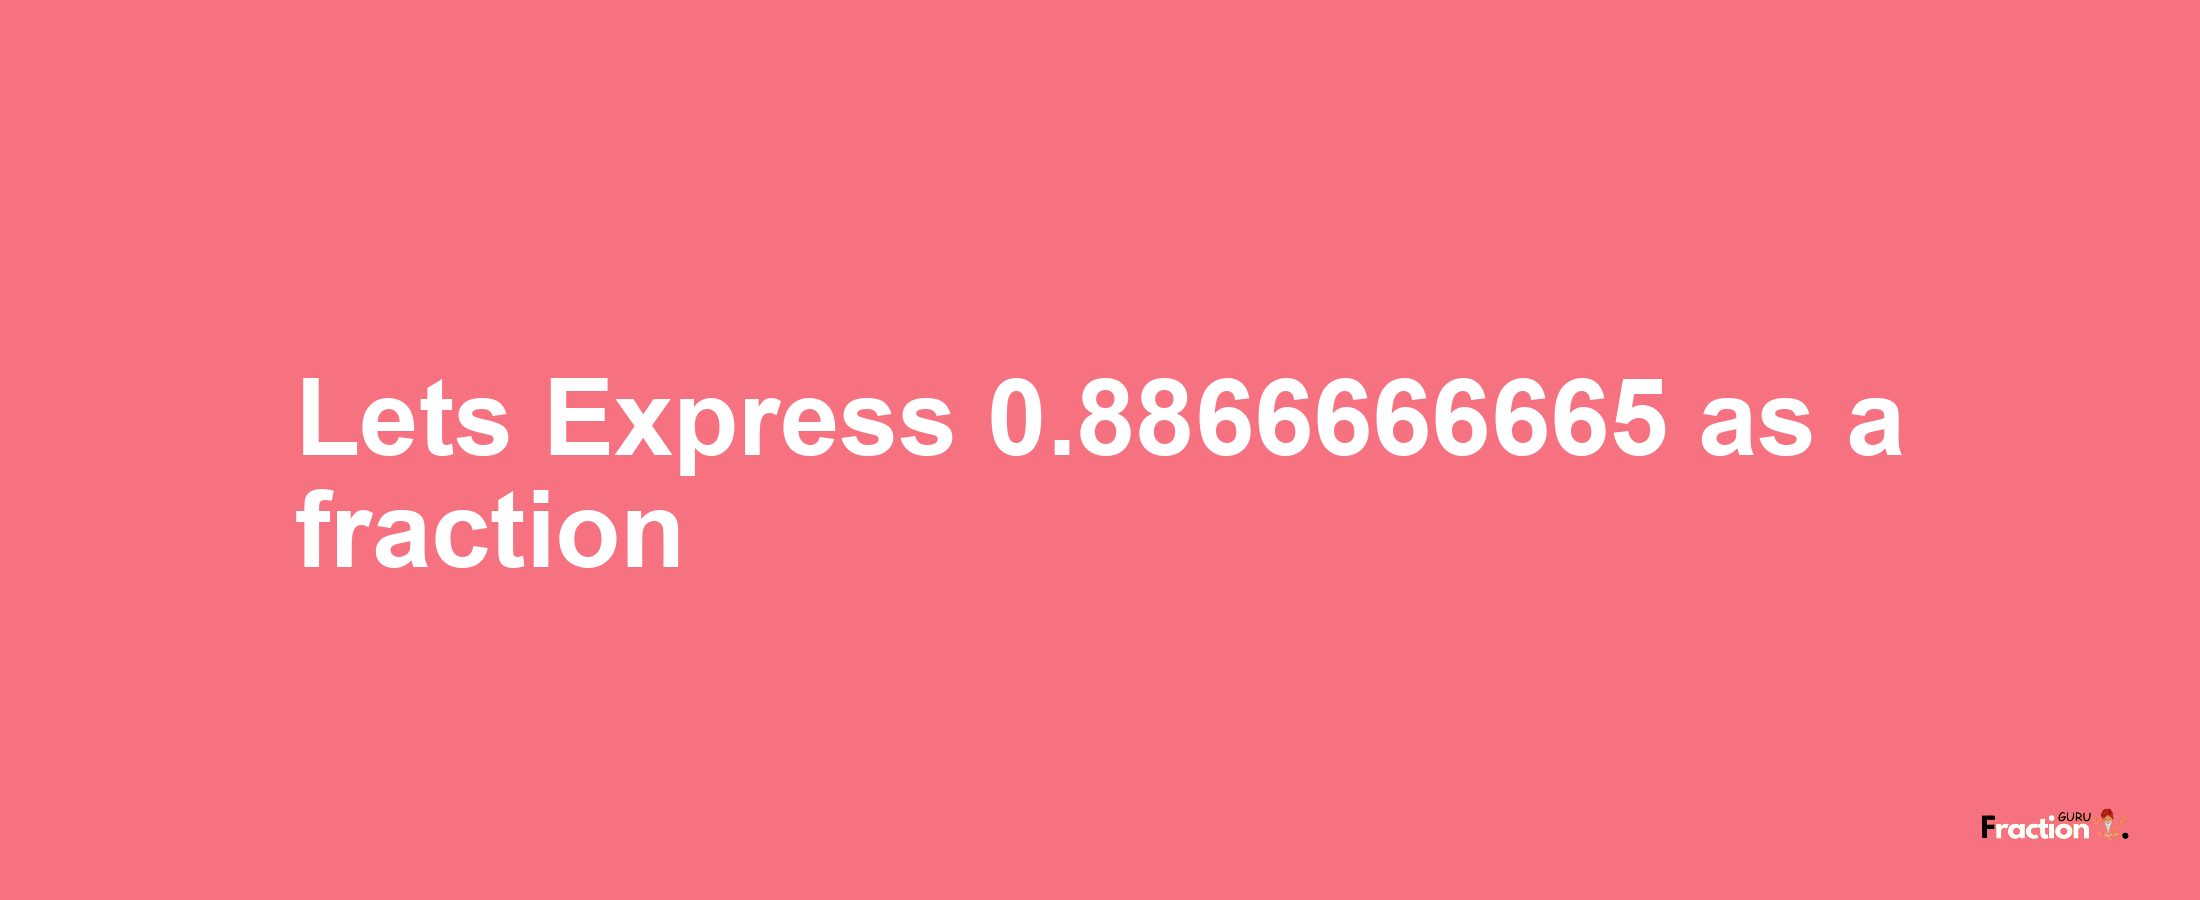 Lets Express 0.8866666665 as afraction